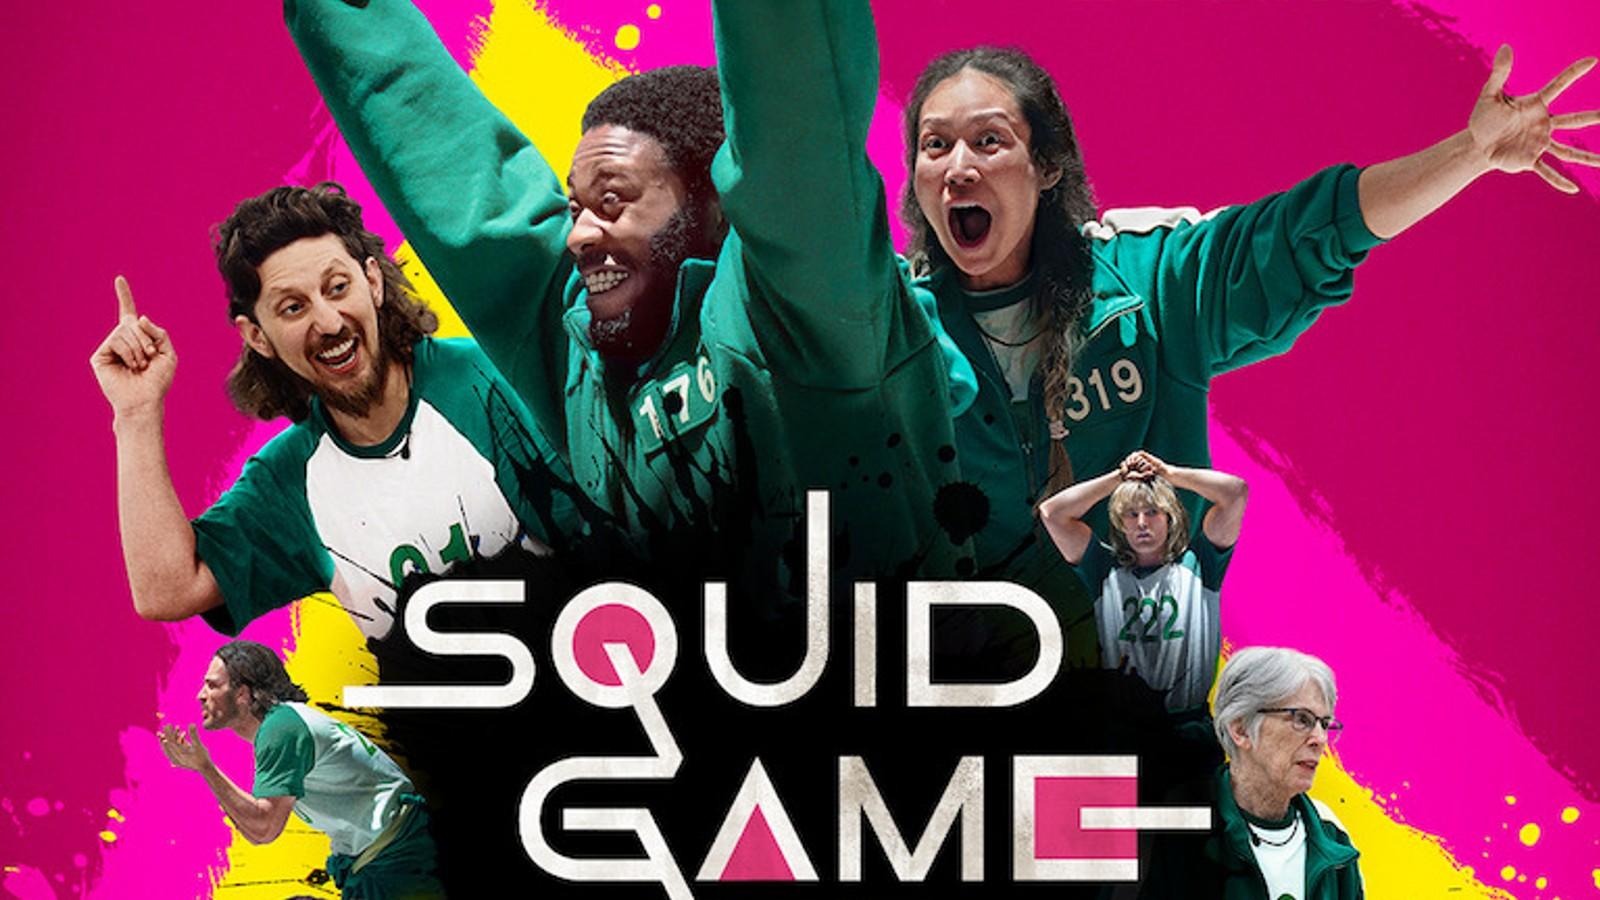 Squid Game: The Challenge Trailer Previews Netflix's Competition